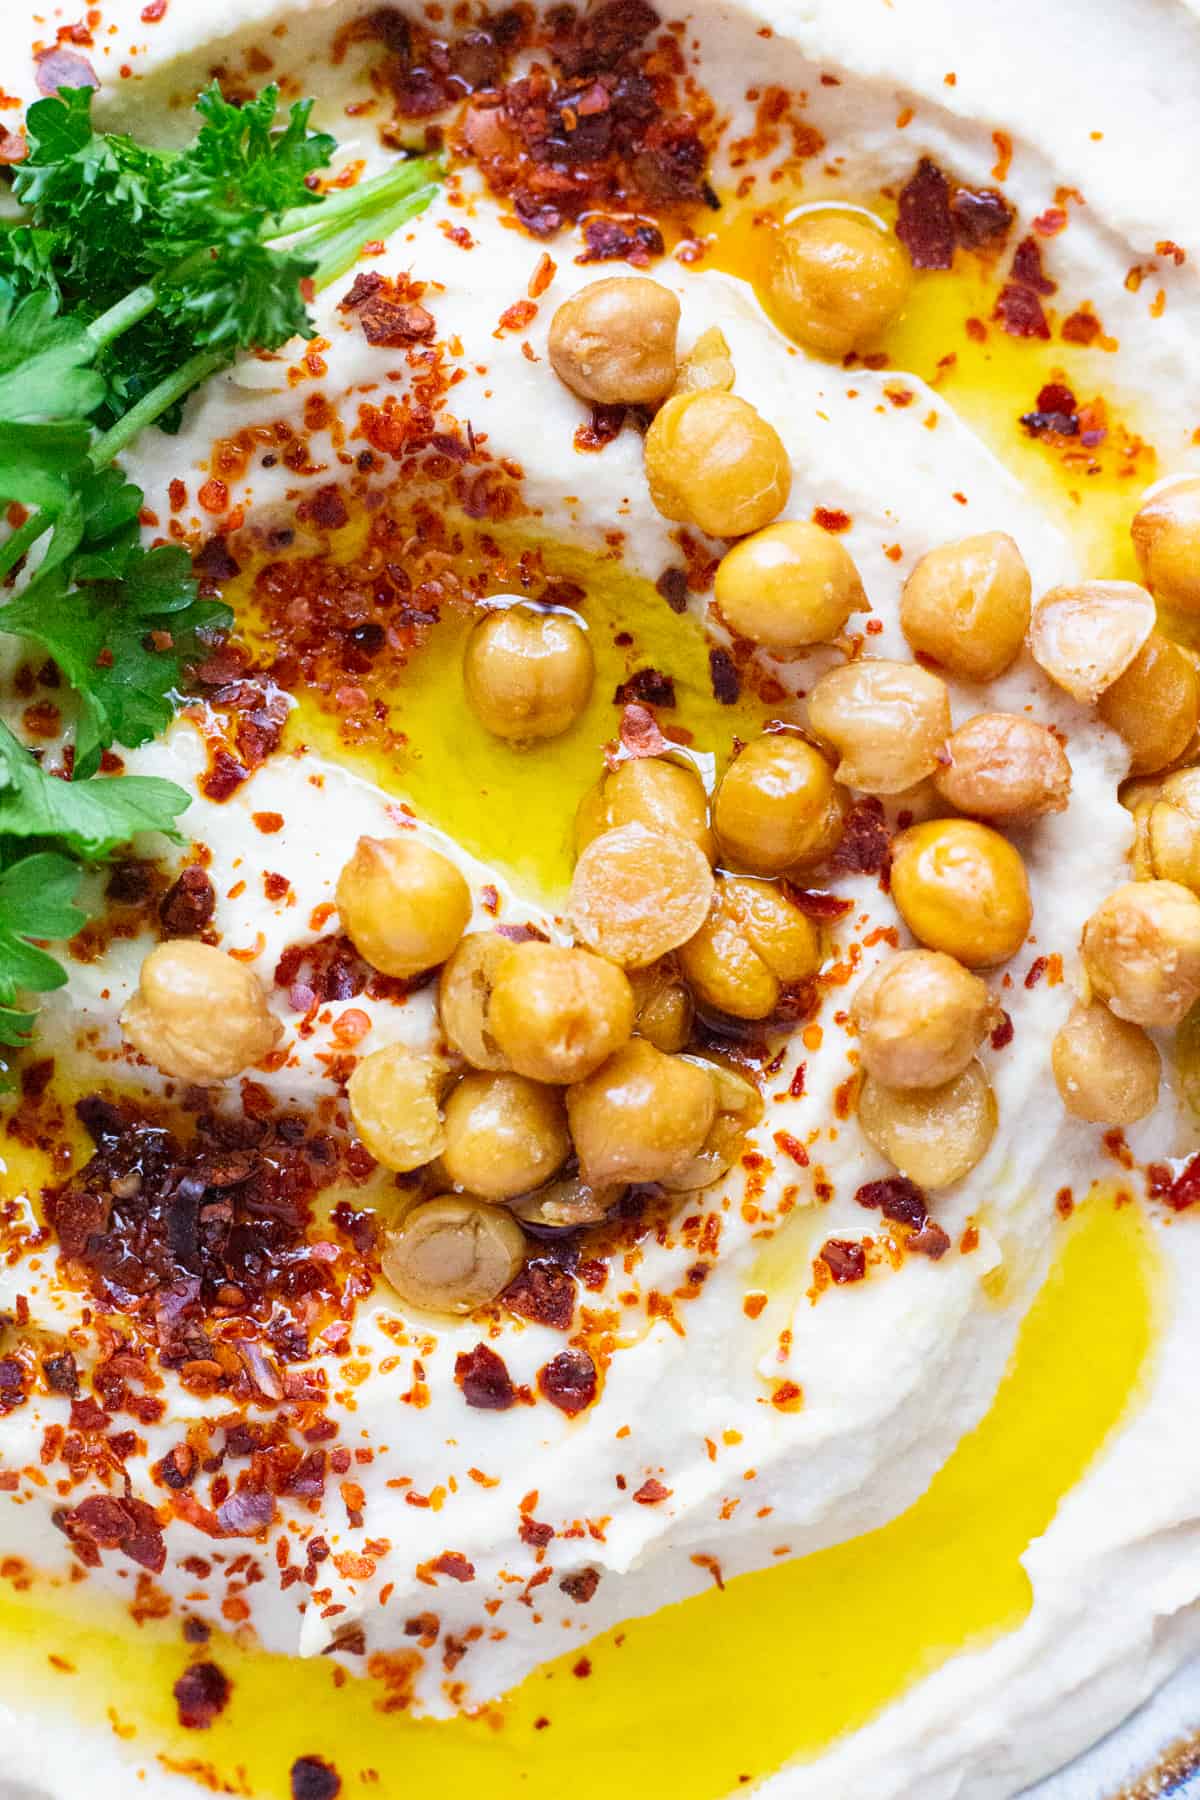 This is the ultimate homemade hummus recipe. It’s smooth and creamy with a bright flavor, and pairs perfectly with bread! Follow along for tip and tricks, a video tutorial and complete details!
